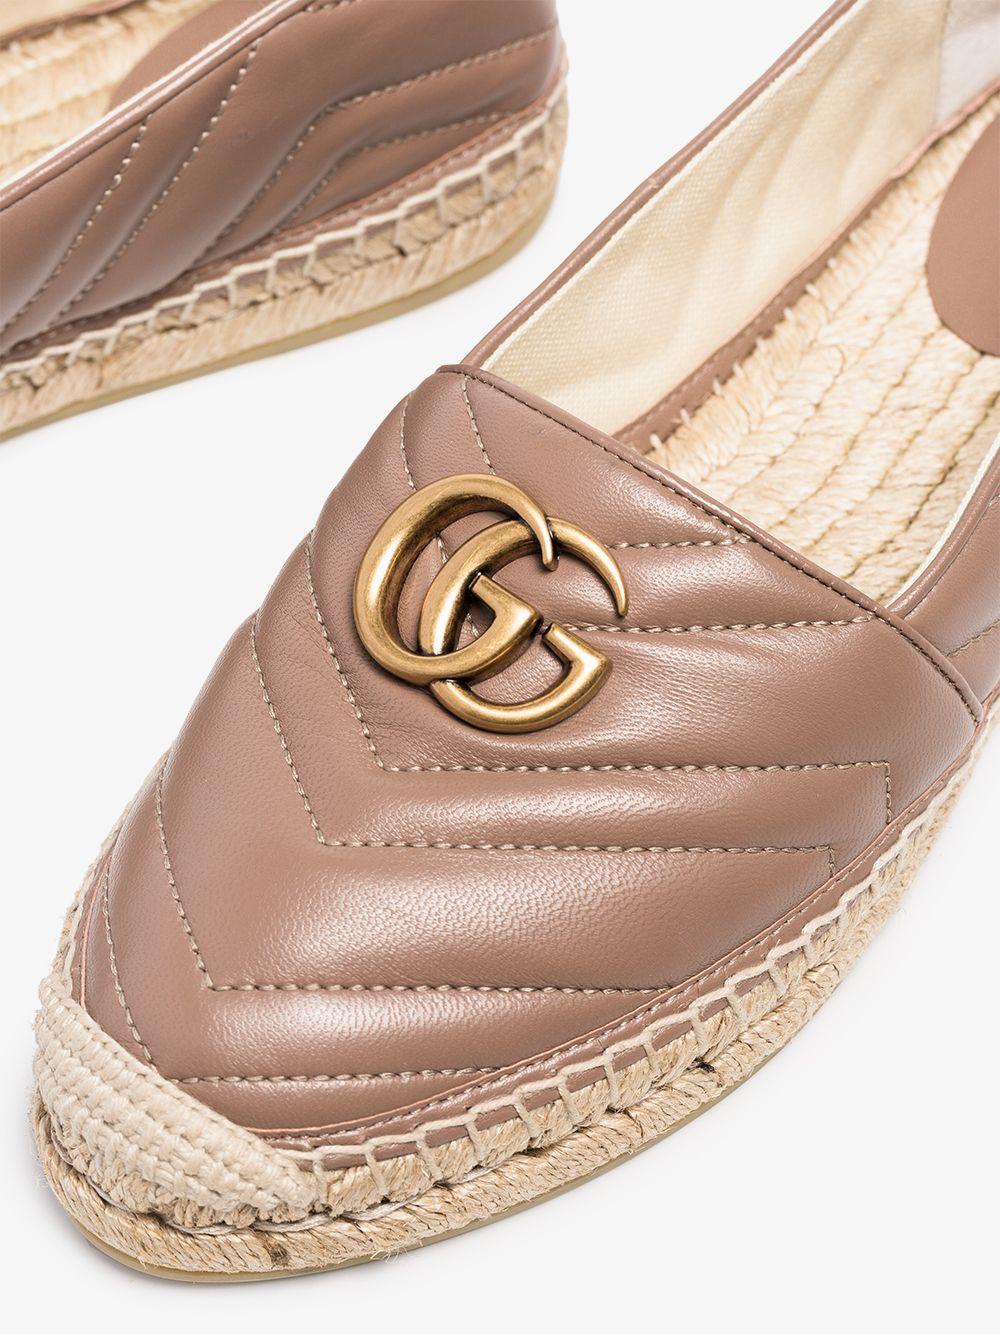 Gucci Pilar Gg Quilted-leather Espadrilles in Natural | Lyst